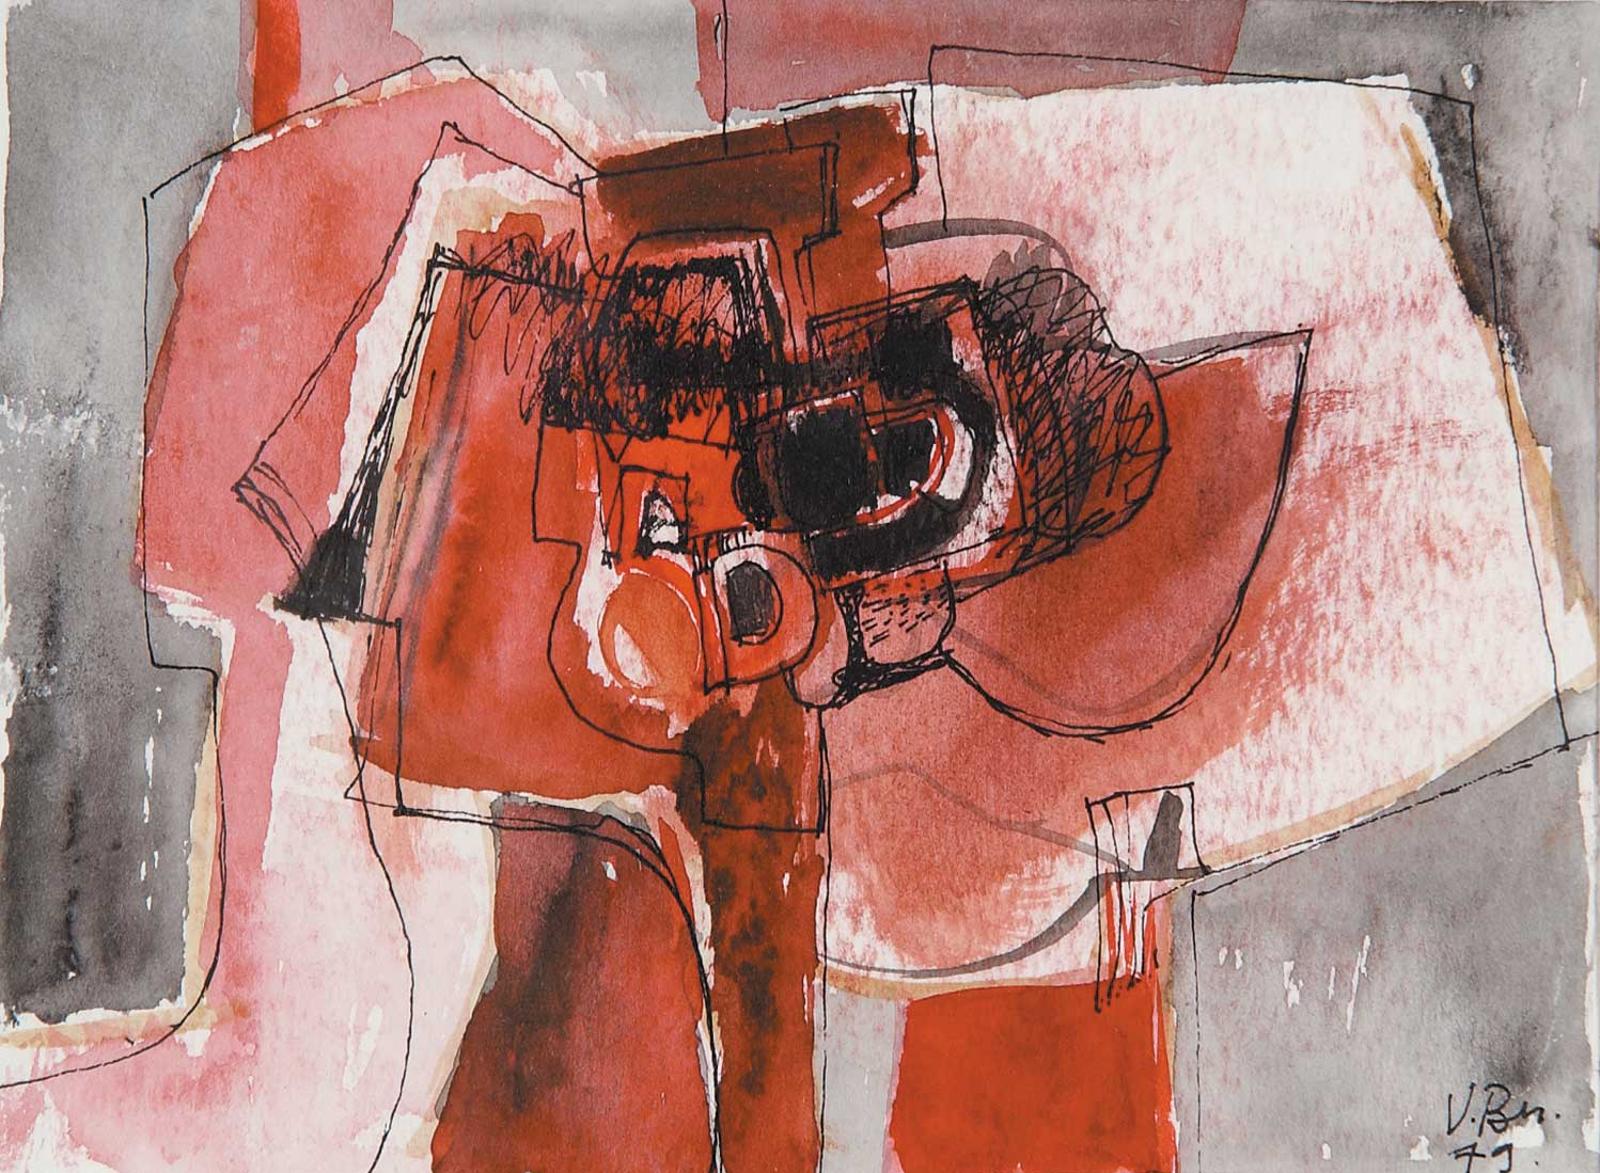 Virginia Buhofer - Untitled - Abstract in Red